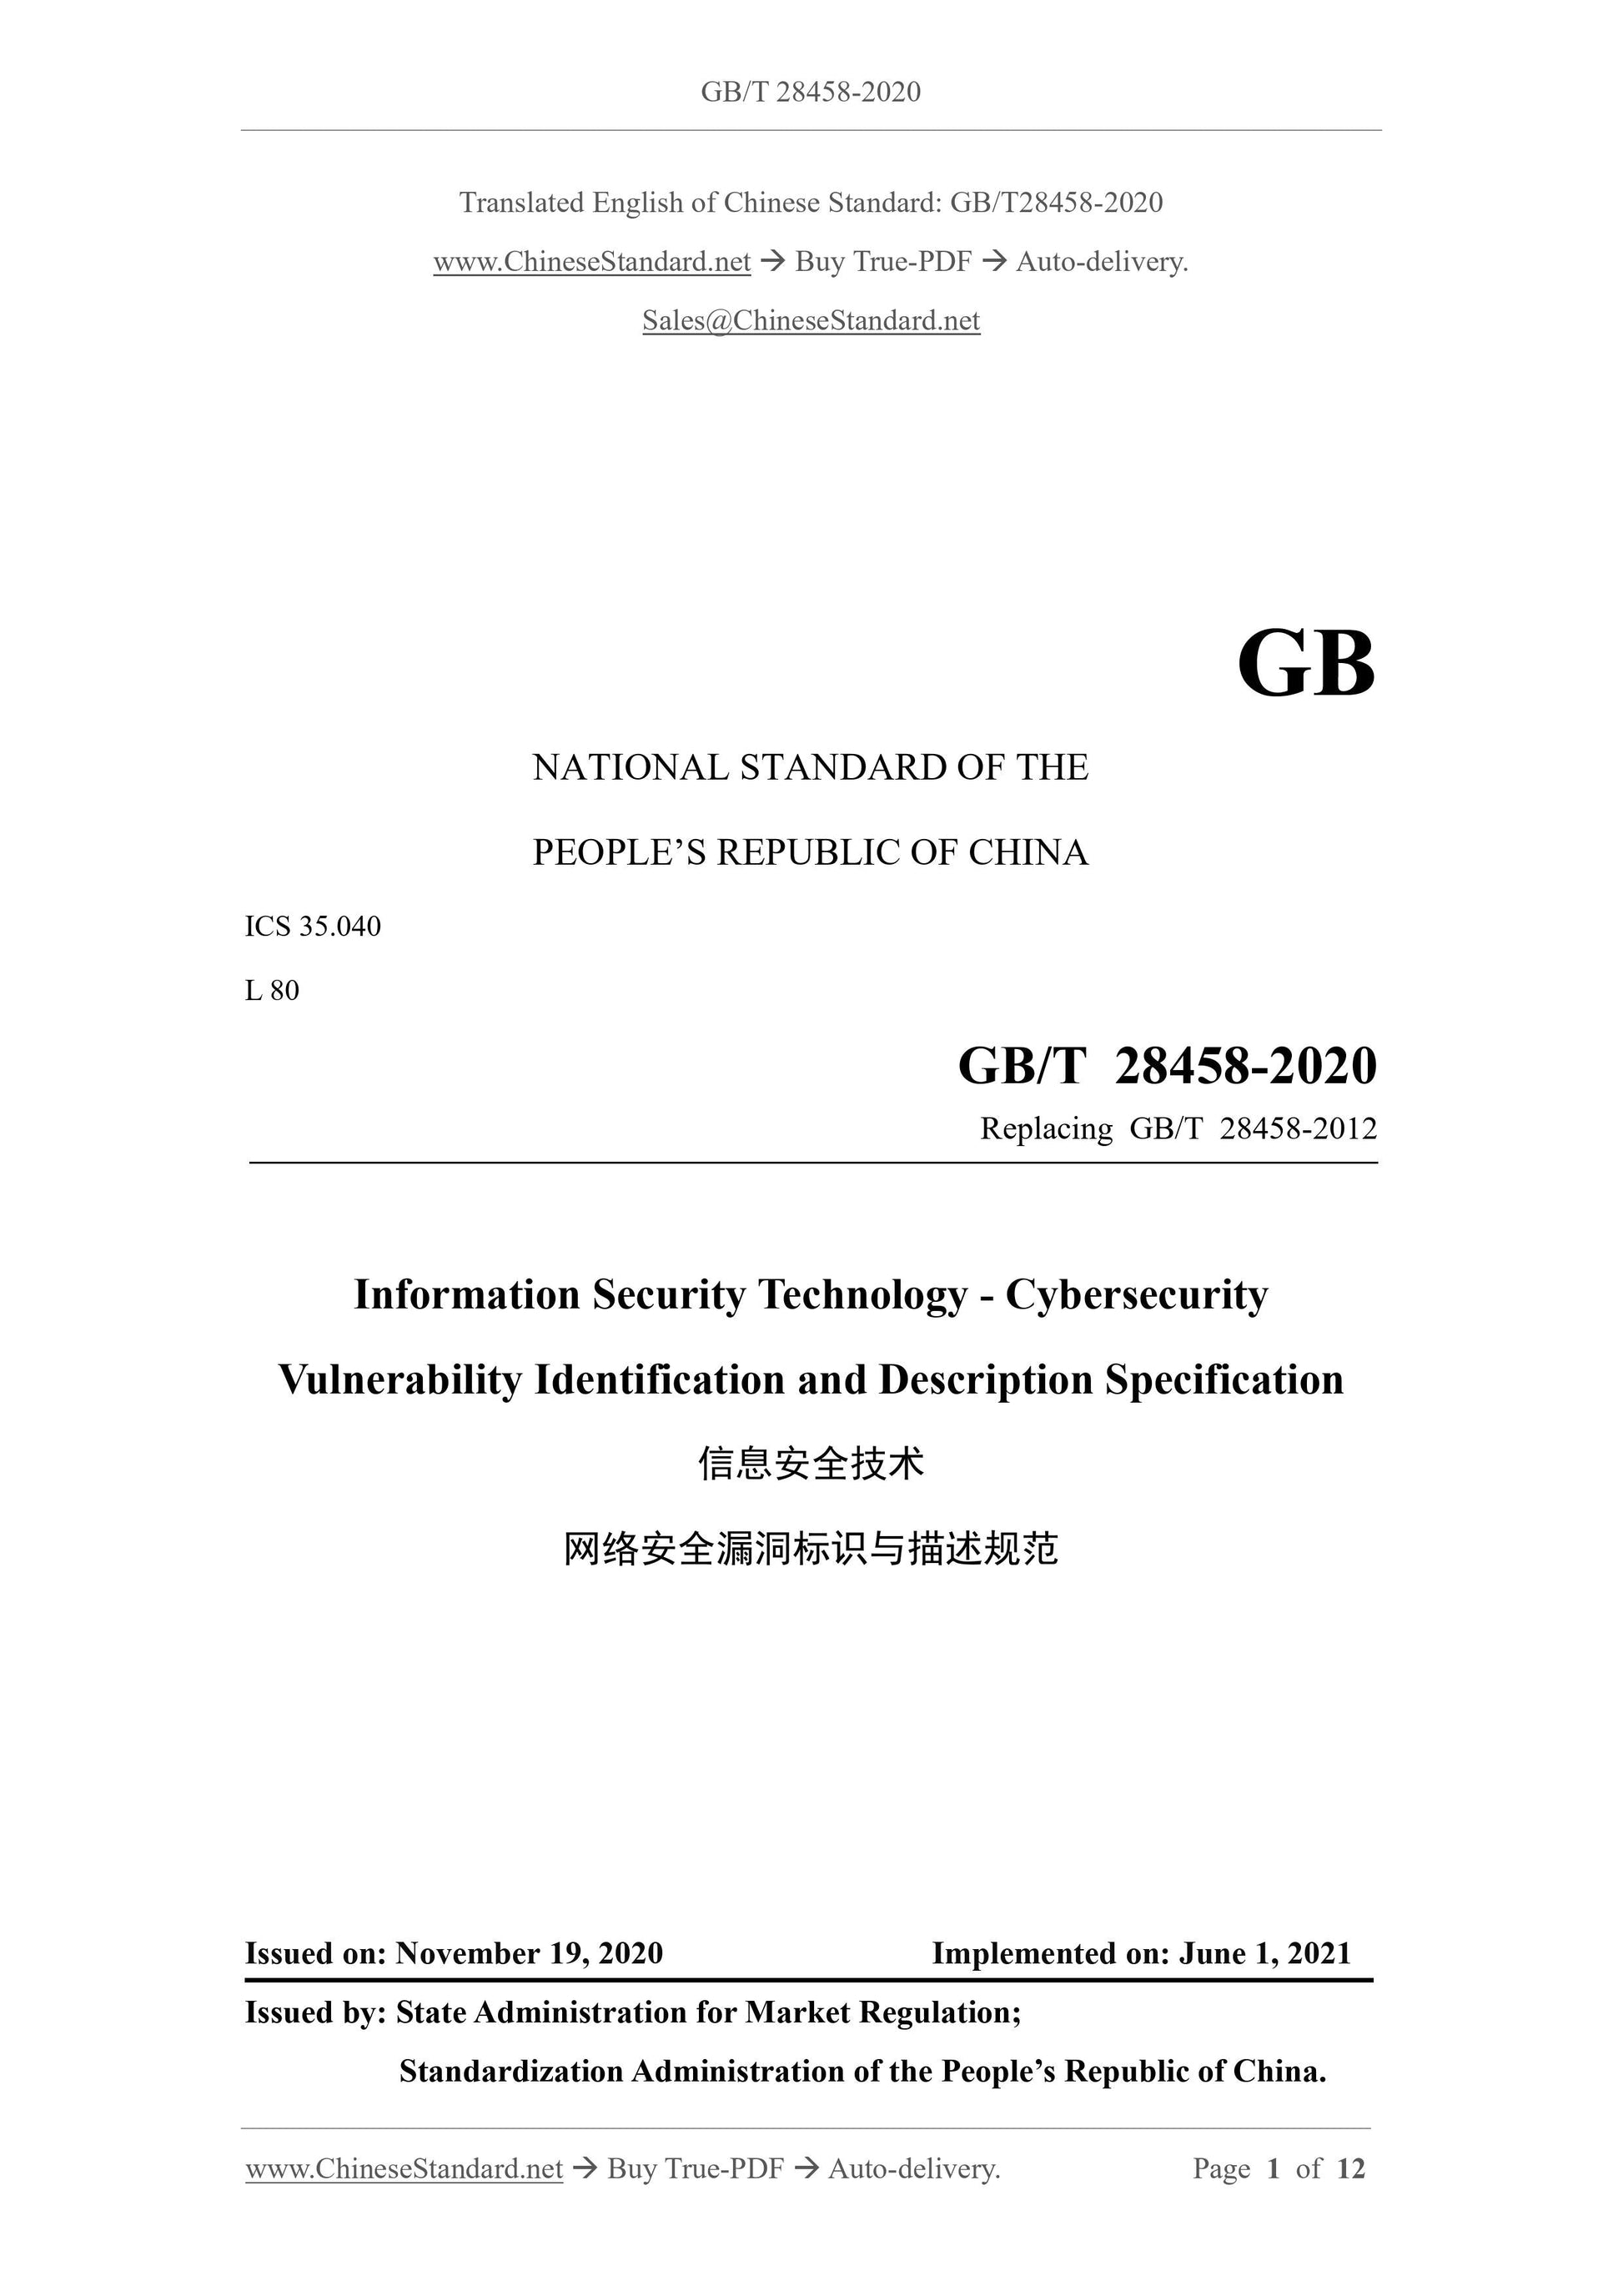 GB/T 28458-2020 Page 1